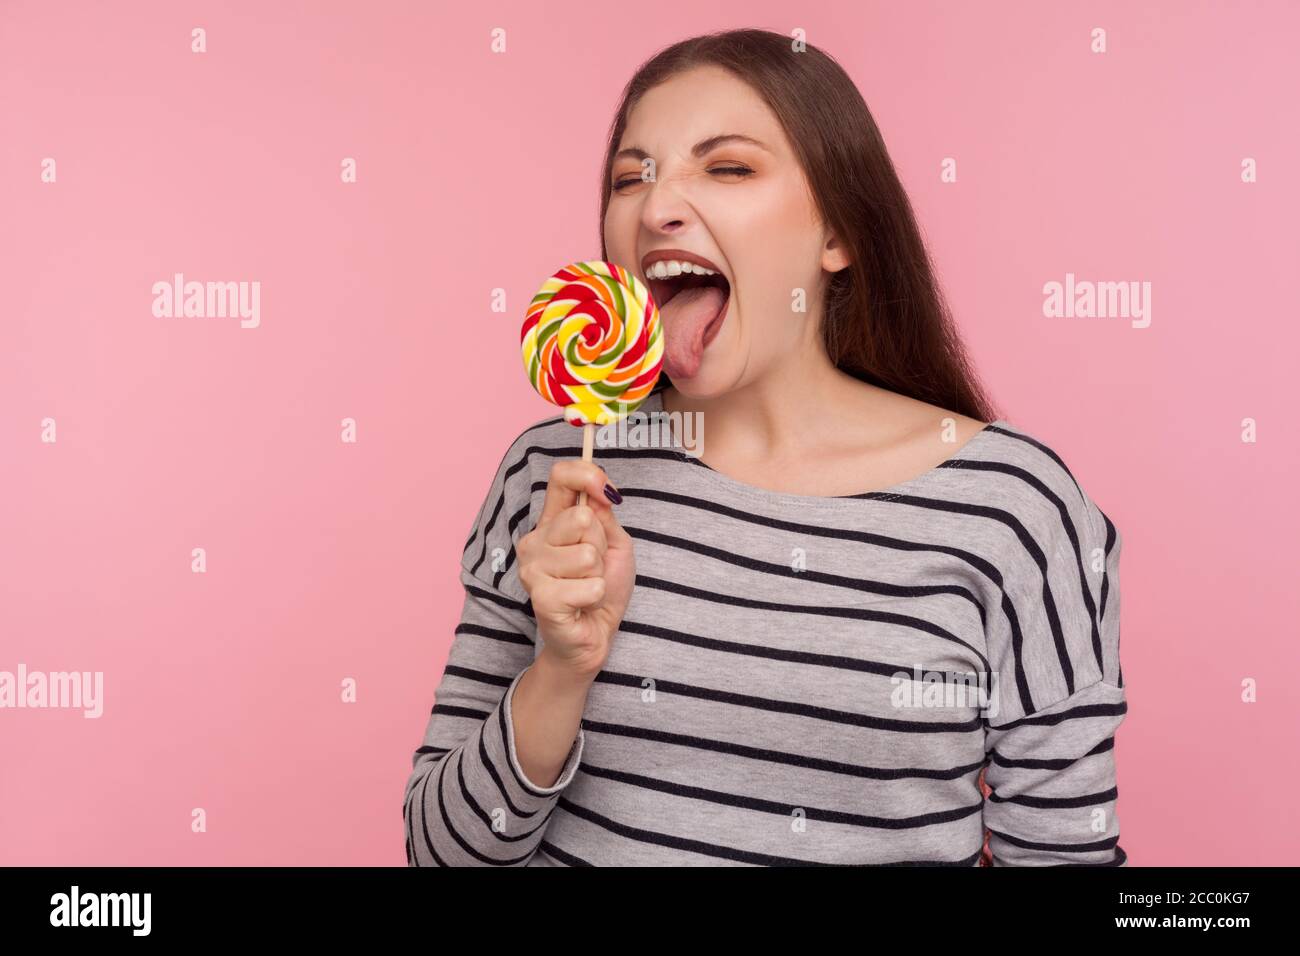 Portrait of woman in striped sweatshirt licking lollipop, tasting sweet round rainbow candy with crazy expression, enjoying delicious flavor dessert. Stock Photo